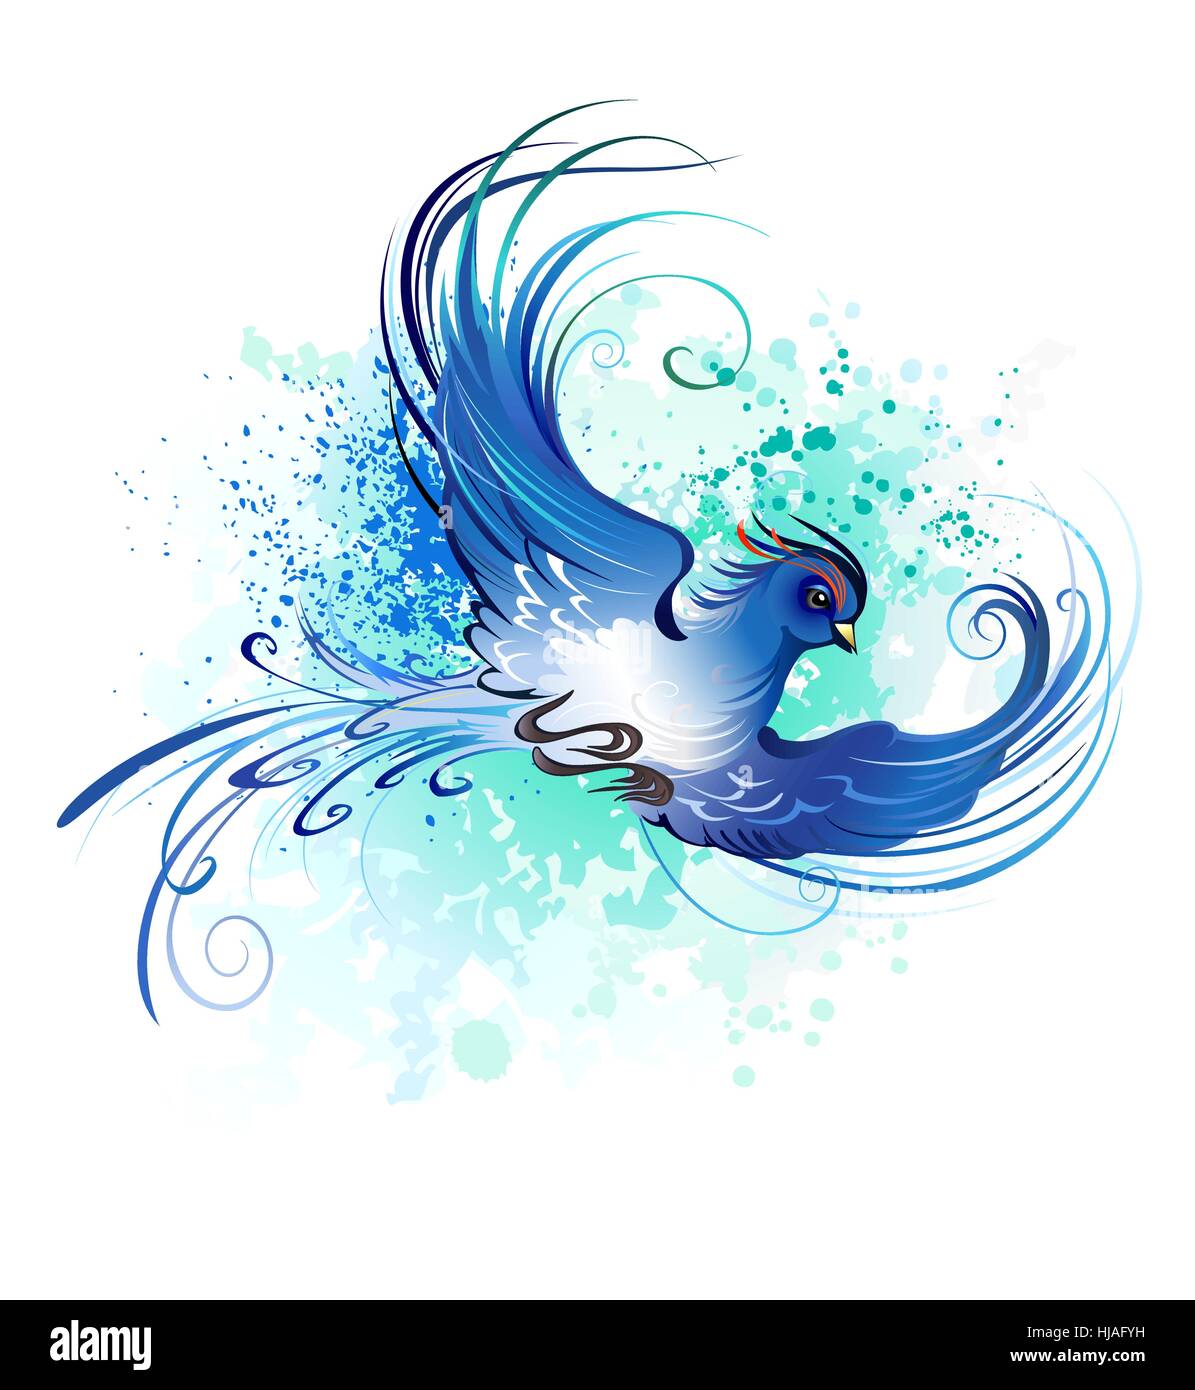 artistically painted, flying blue bird on a light background. Stock Vector